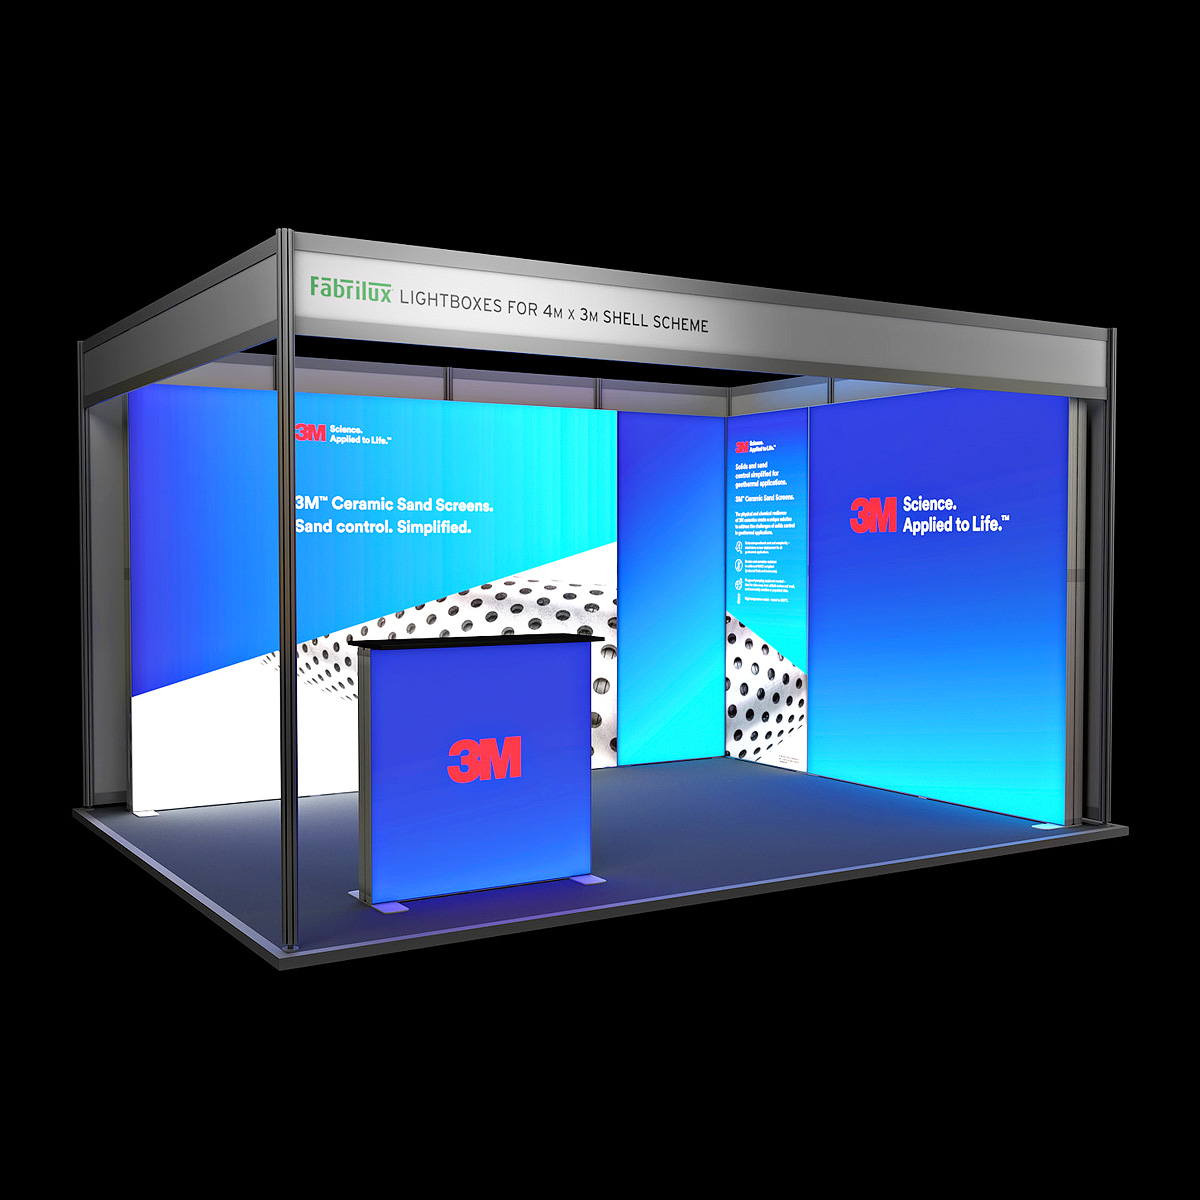 4m x 3m FABRILUX® LED Lightboxes Modular Exhibition Stand Shell Scheme